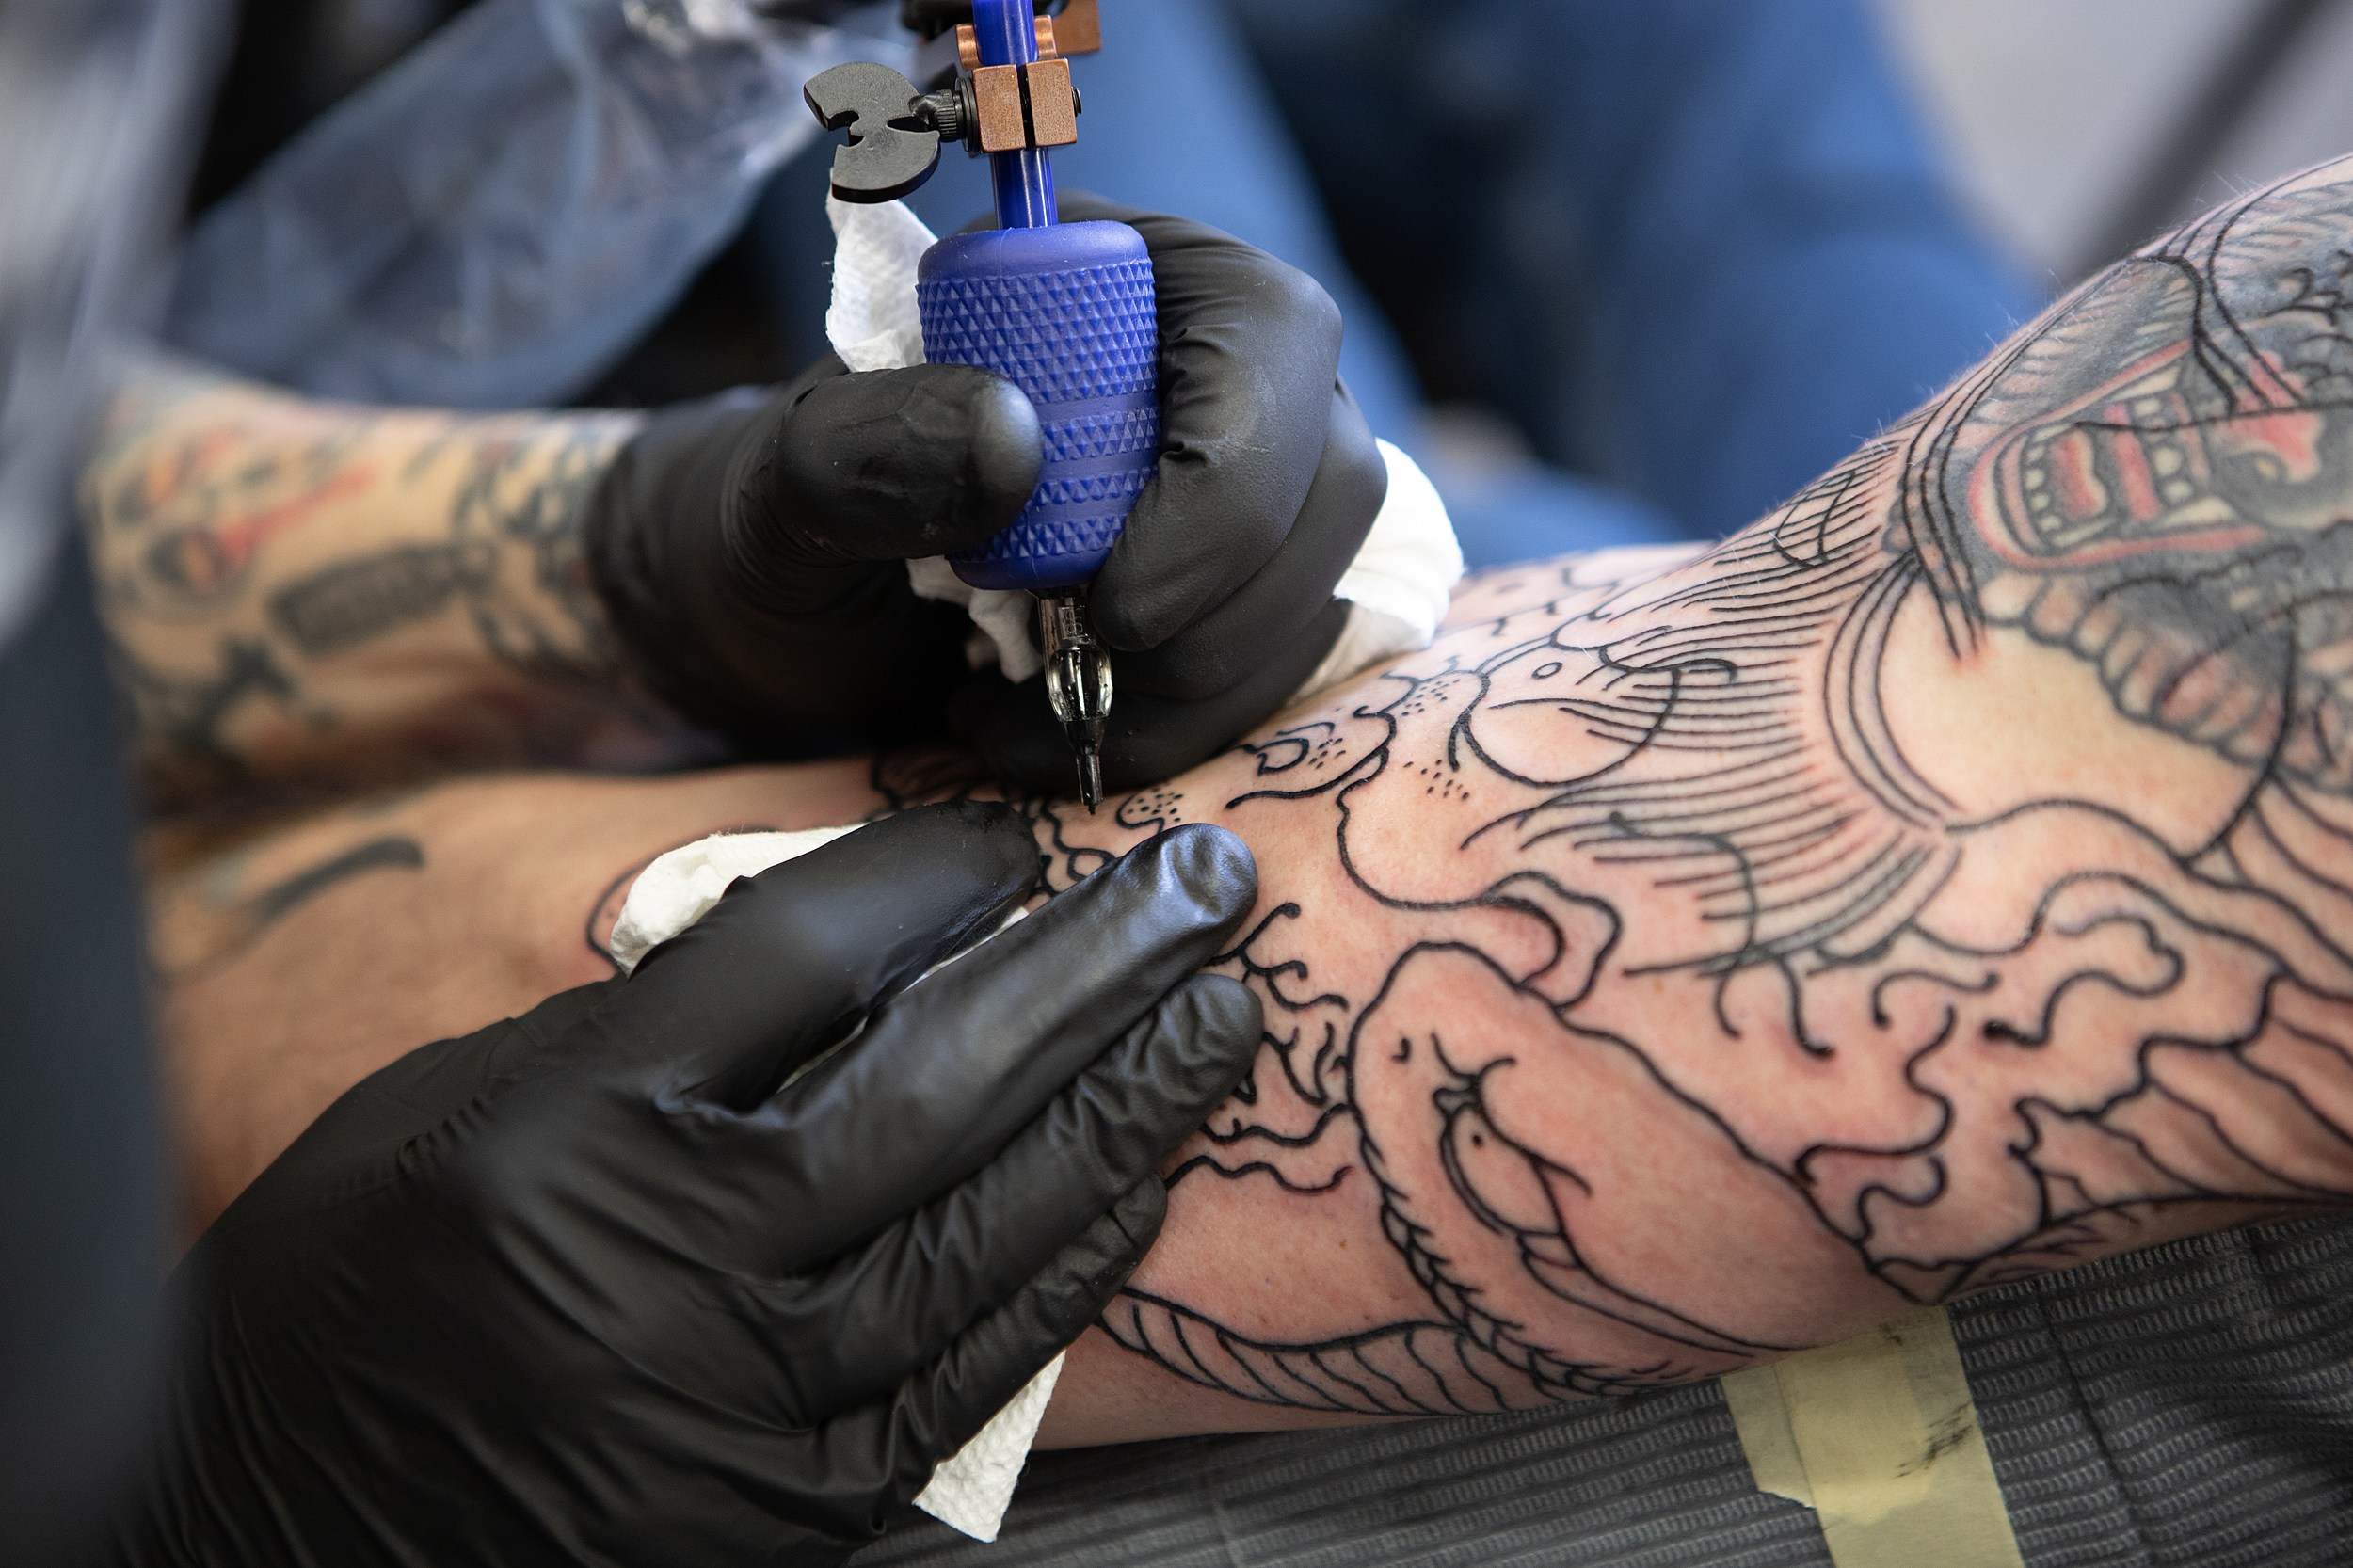 Michigan fan inked with 12 Wolverinesthemed tattoos